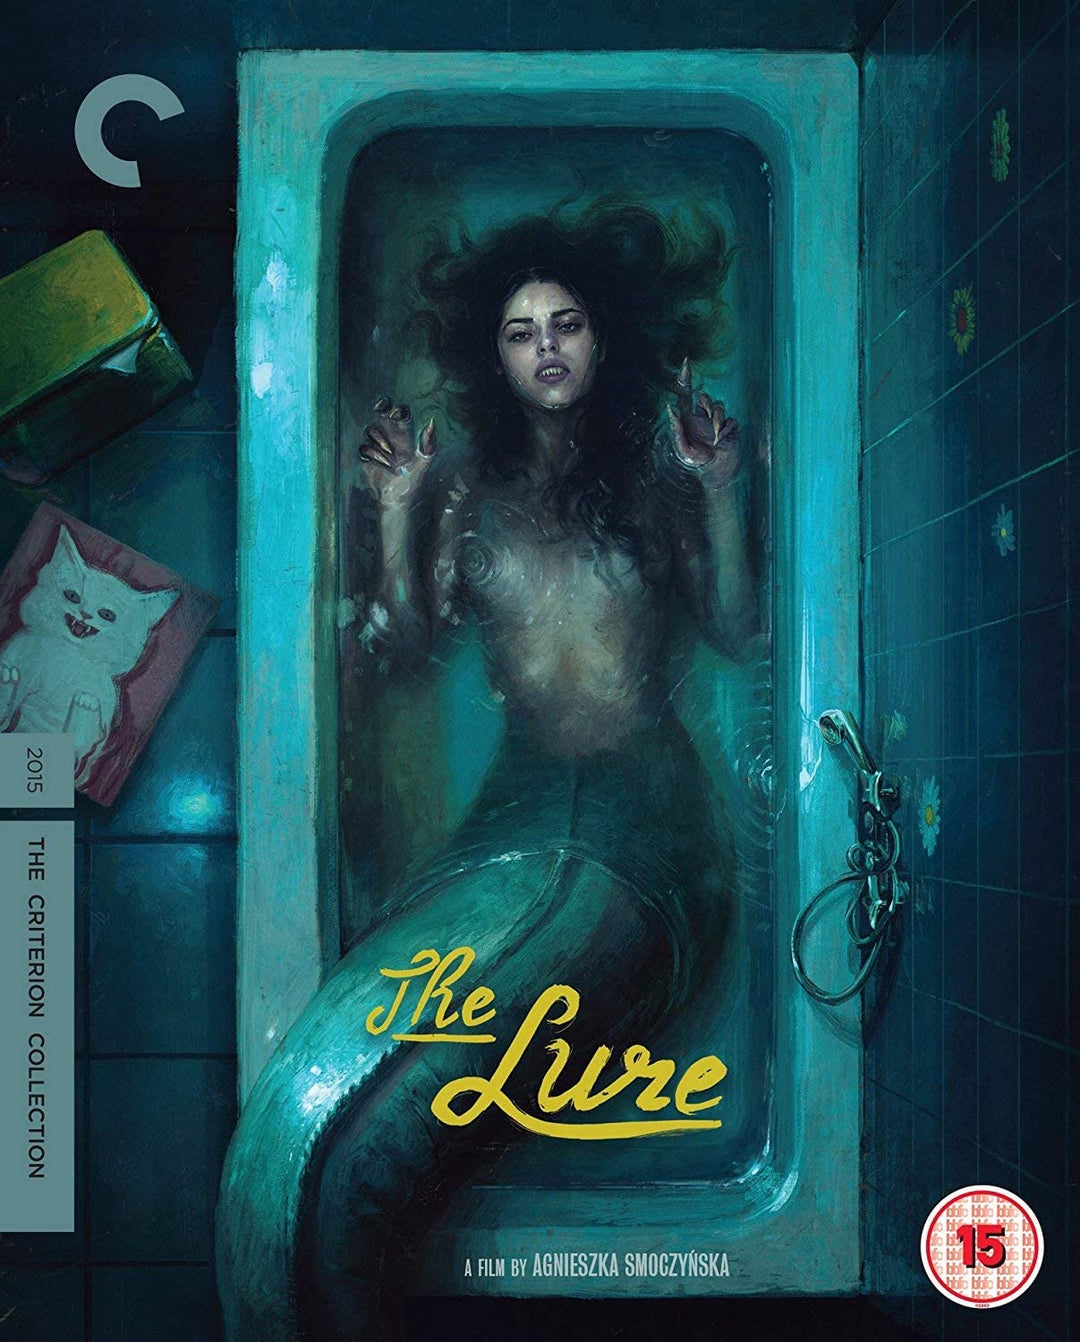 The Lure - Musical/Horror [Blu-ray]